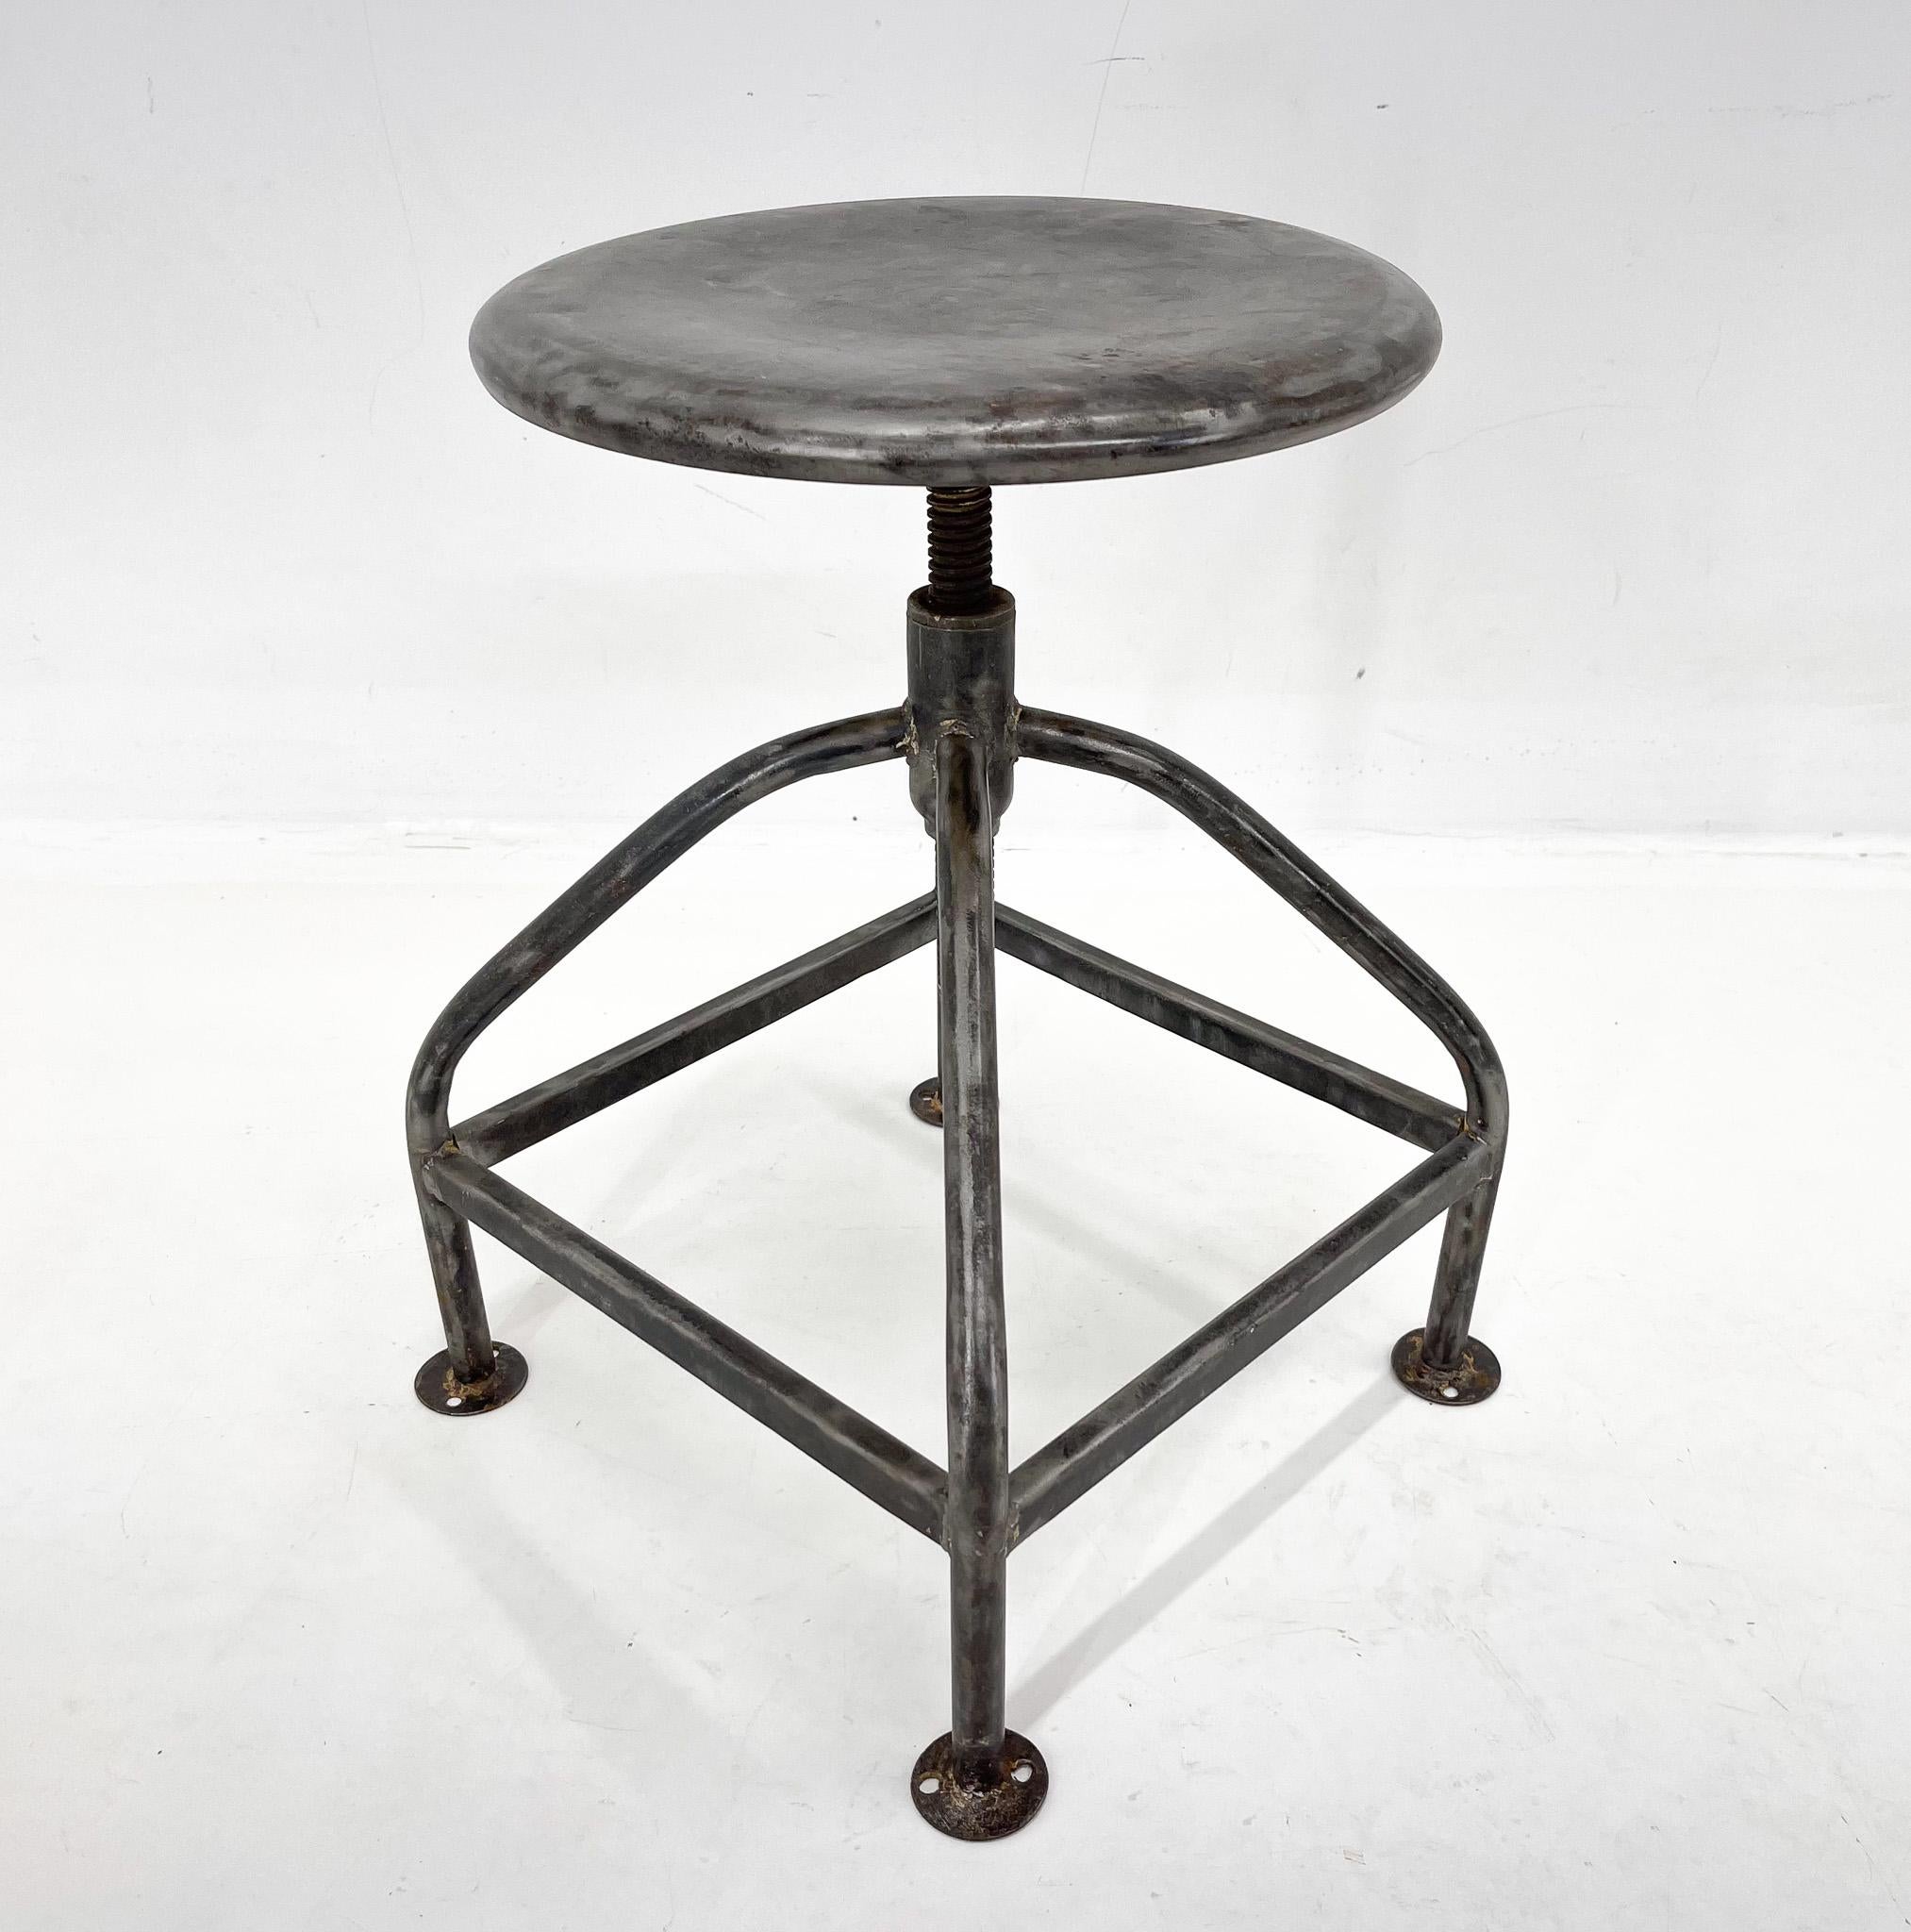 Vintage industrail stool with adjustable hight. Made of brushed steel. Widest point at the bottom is 39 cm. Maximum hight can be 60 cm and minimum hight is 45 cm.